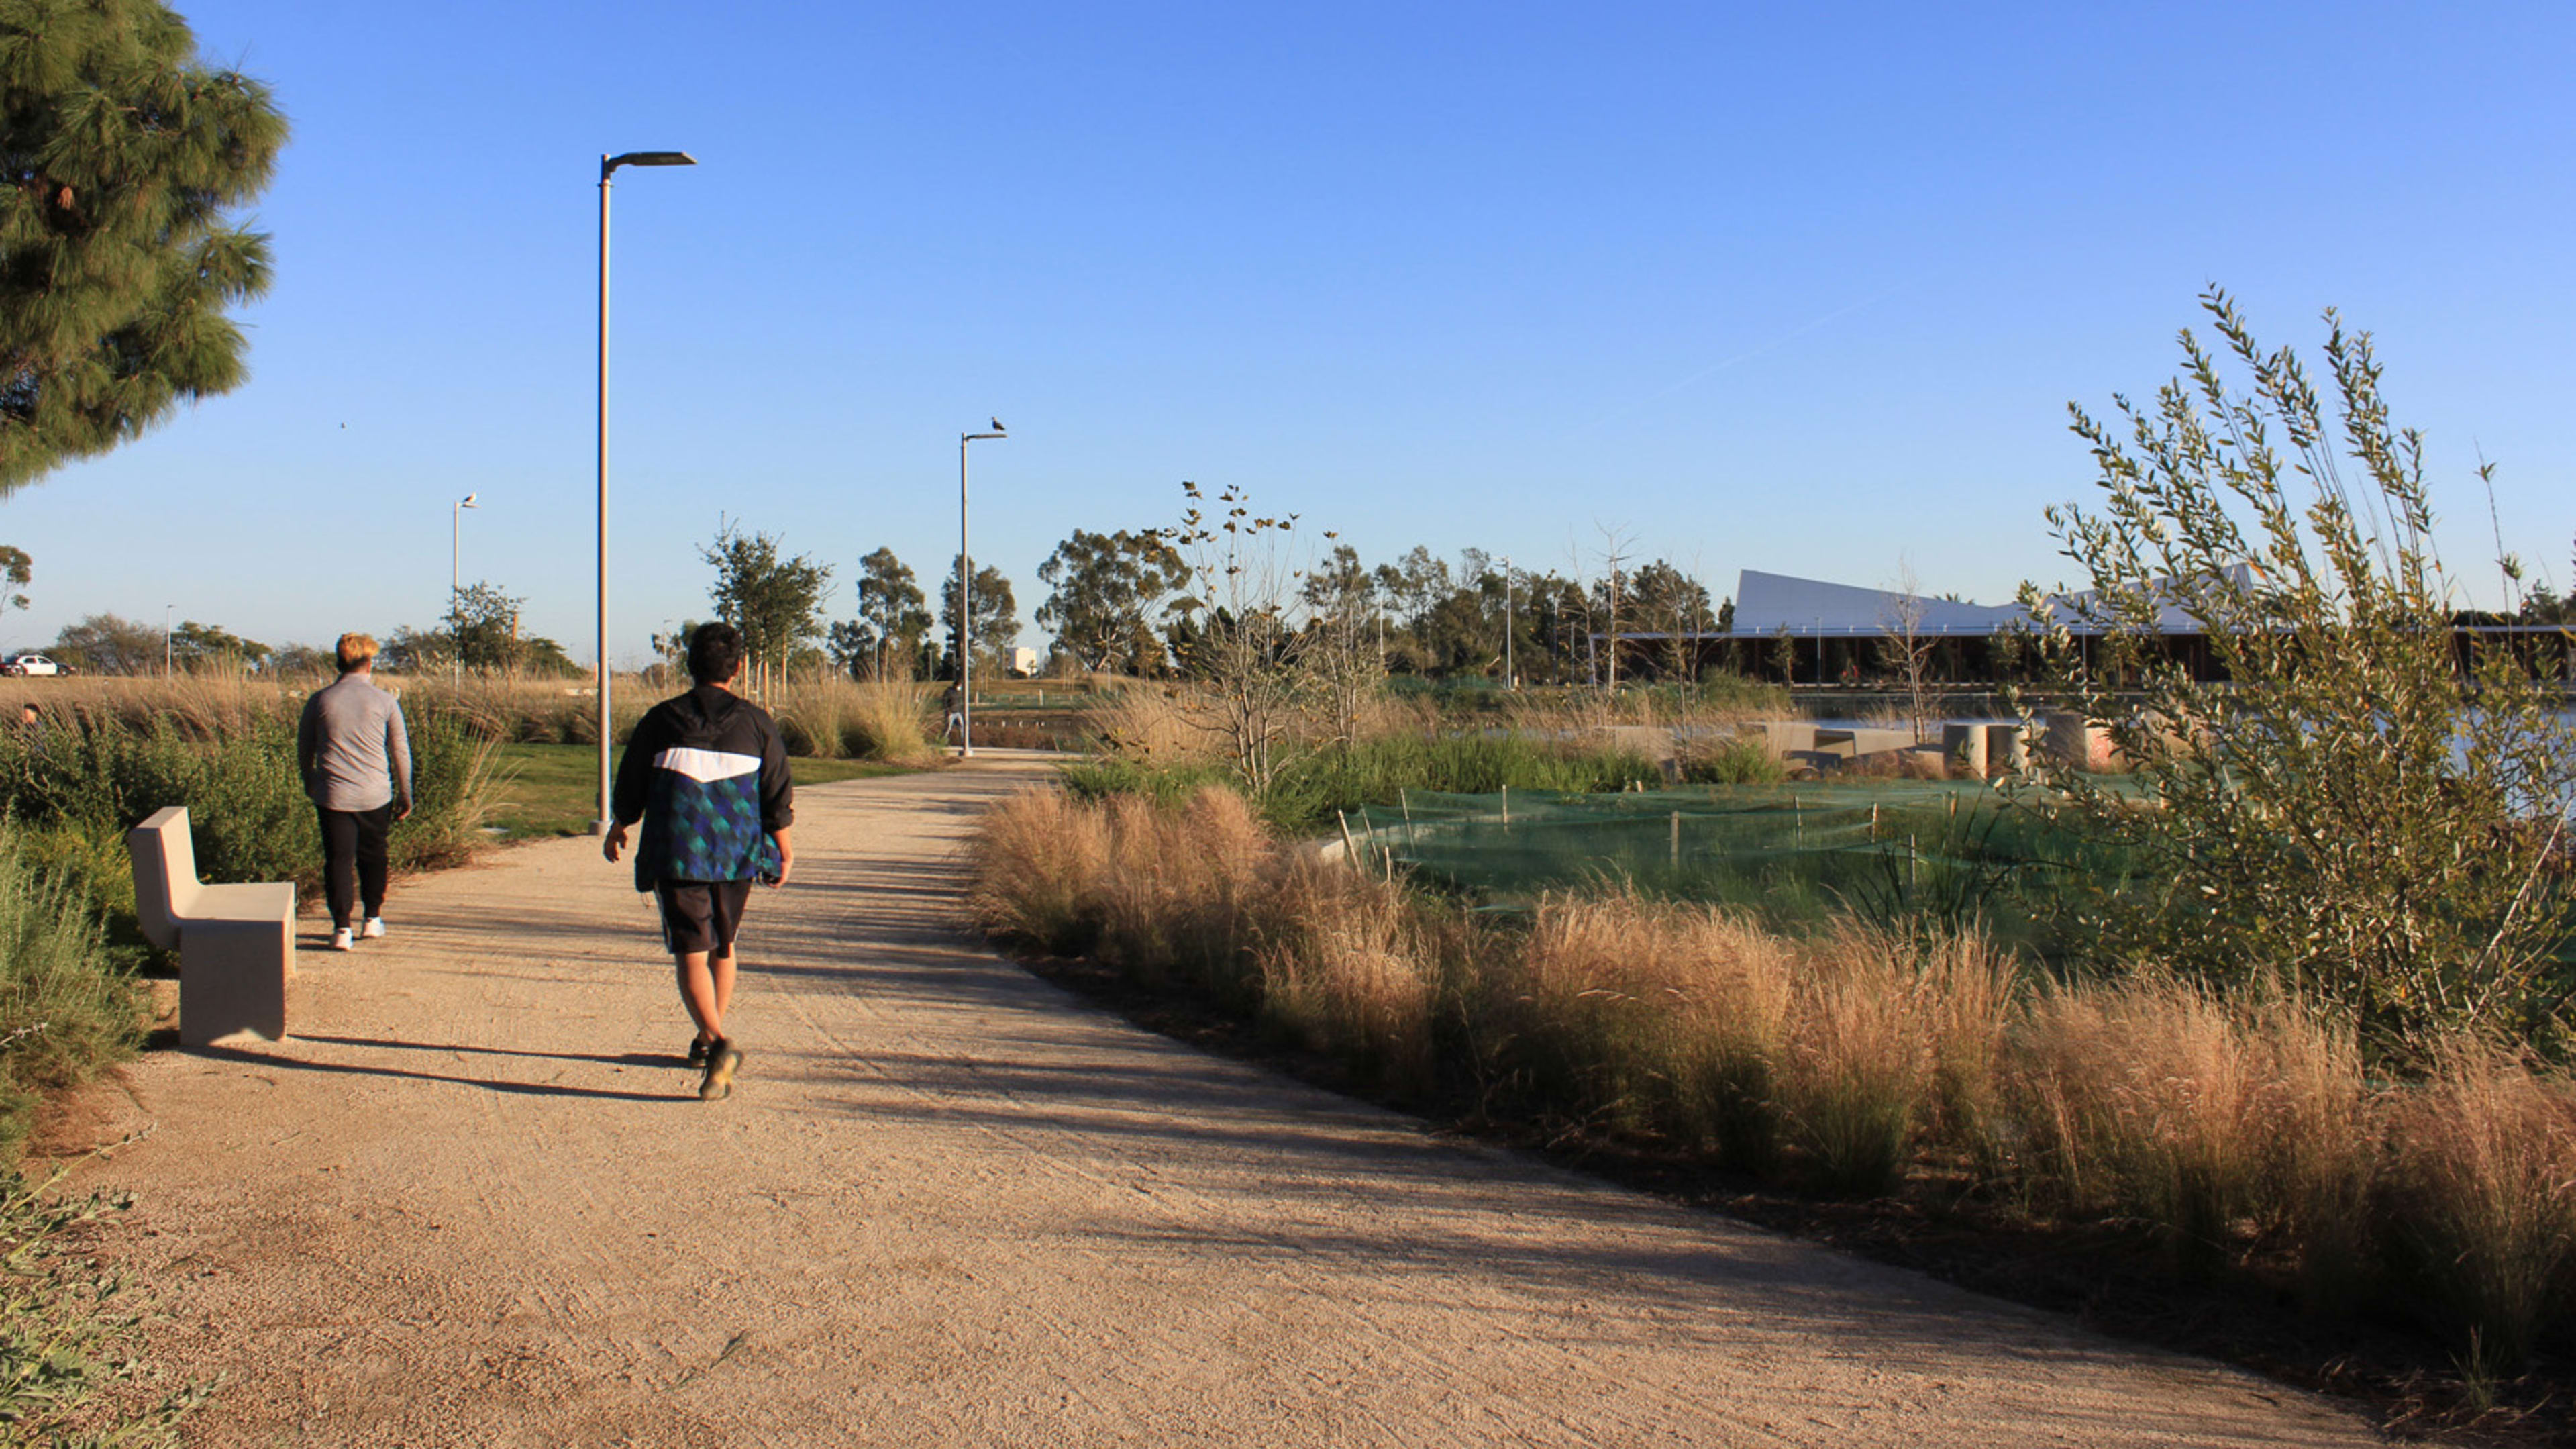 L.A. loses 100 billion gallons of water a year. This park is helping recapture it